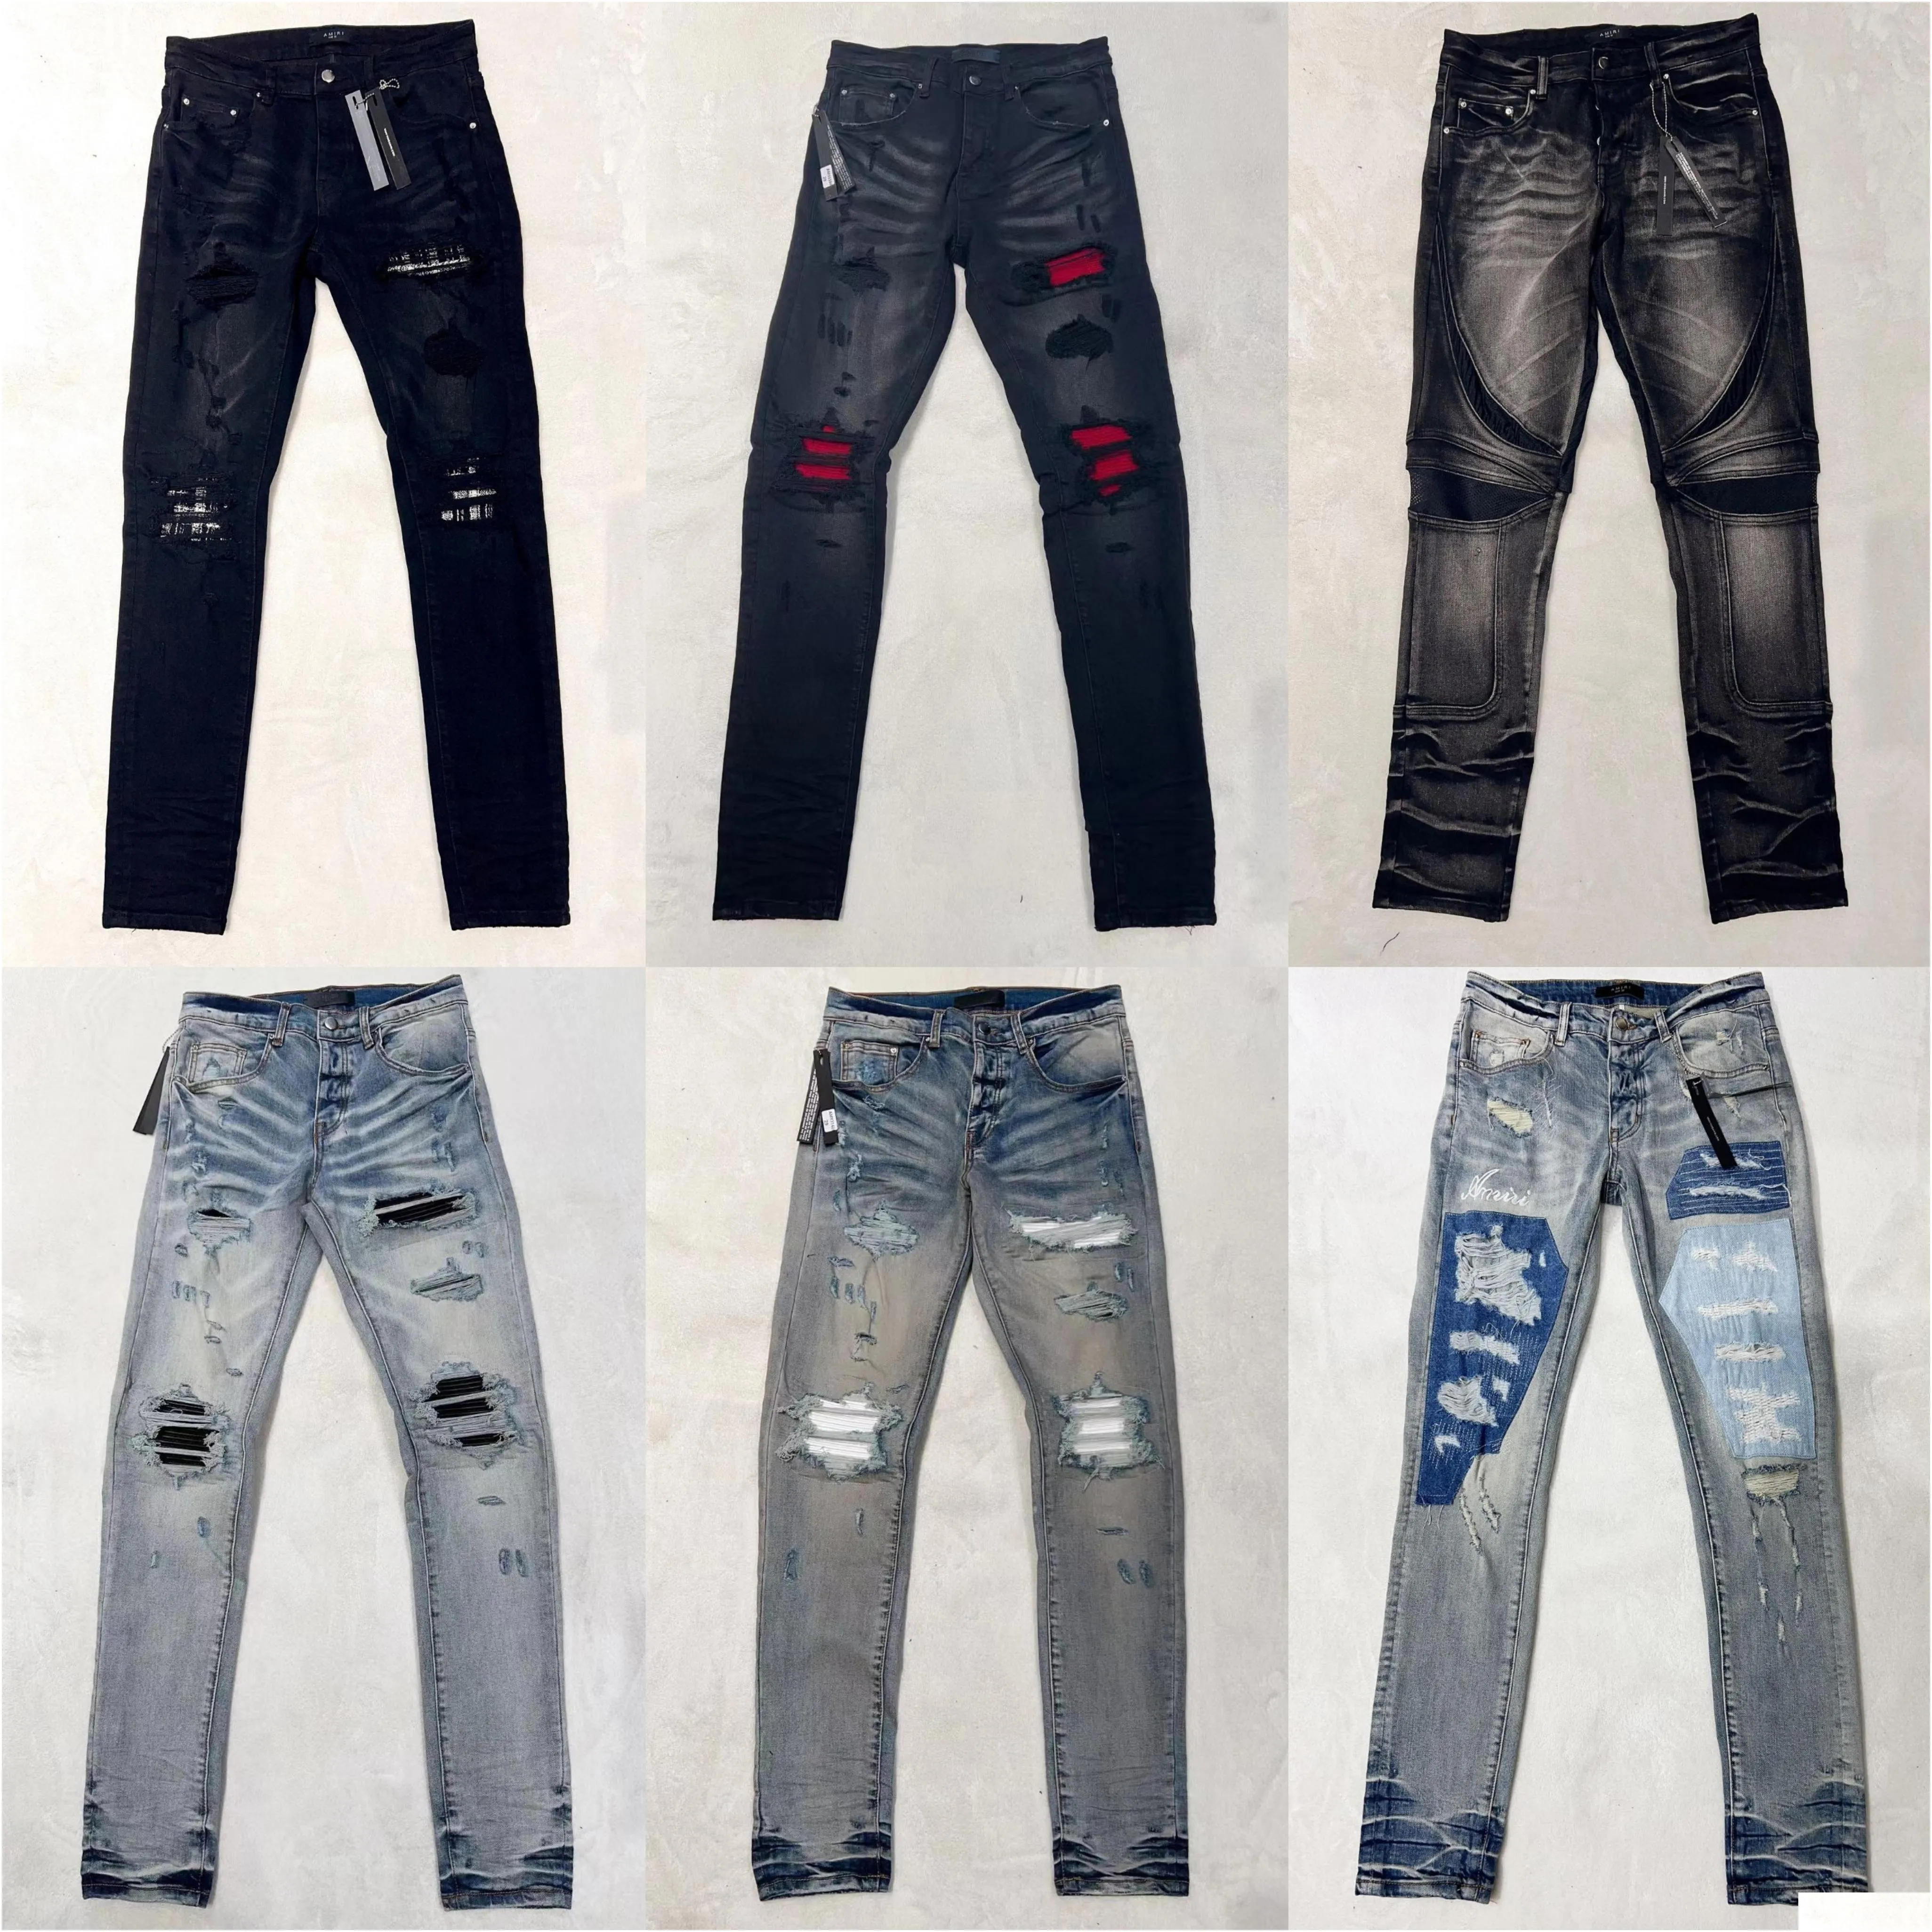 Jeans Mens Jeans designer Jeans Mens Pant mens Slim Fit Elastic Embroidery Fashion jean style Cat Whisker Whitening Men`s Broken Hole Jeans Same Style High